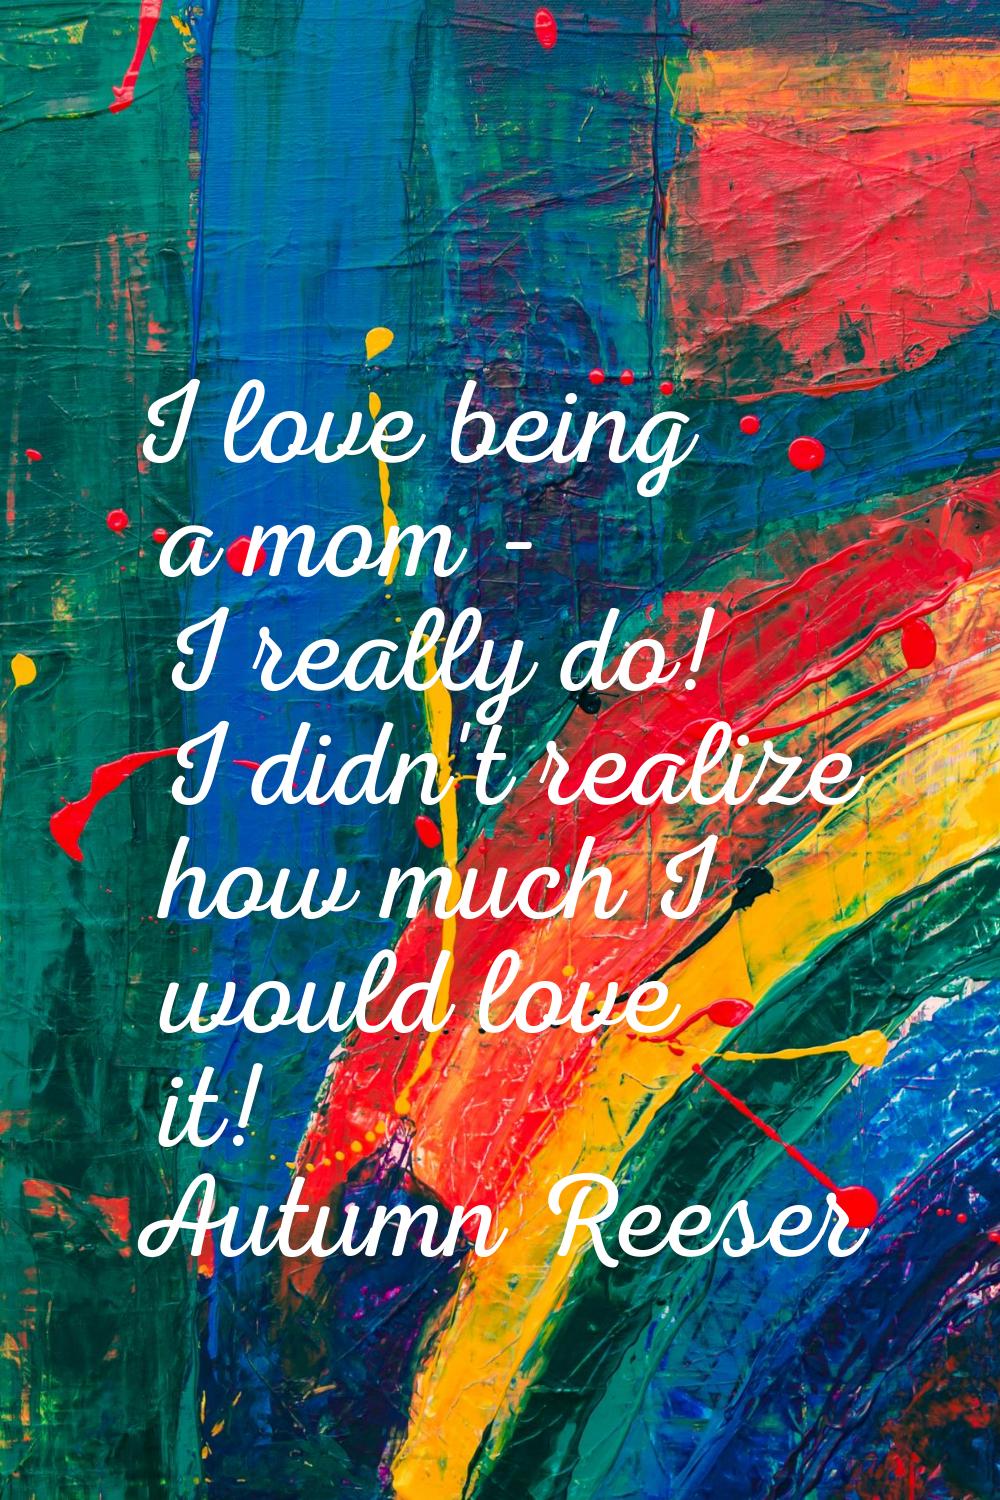 I love being a mom - I really do! I didn't realize how much I would love it!